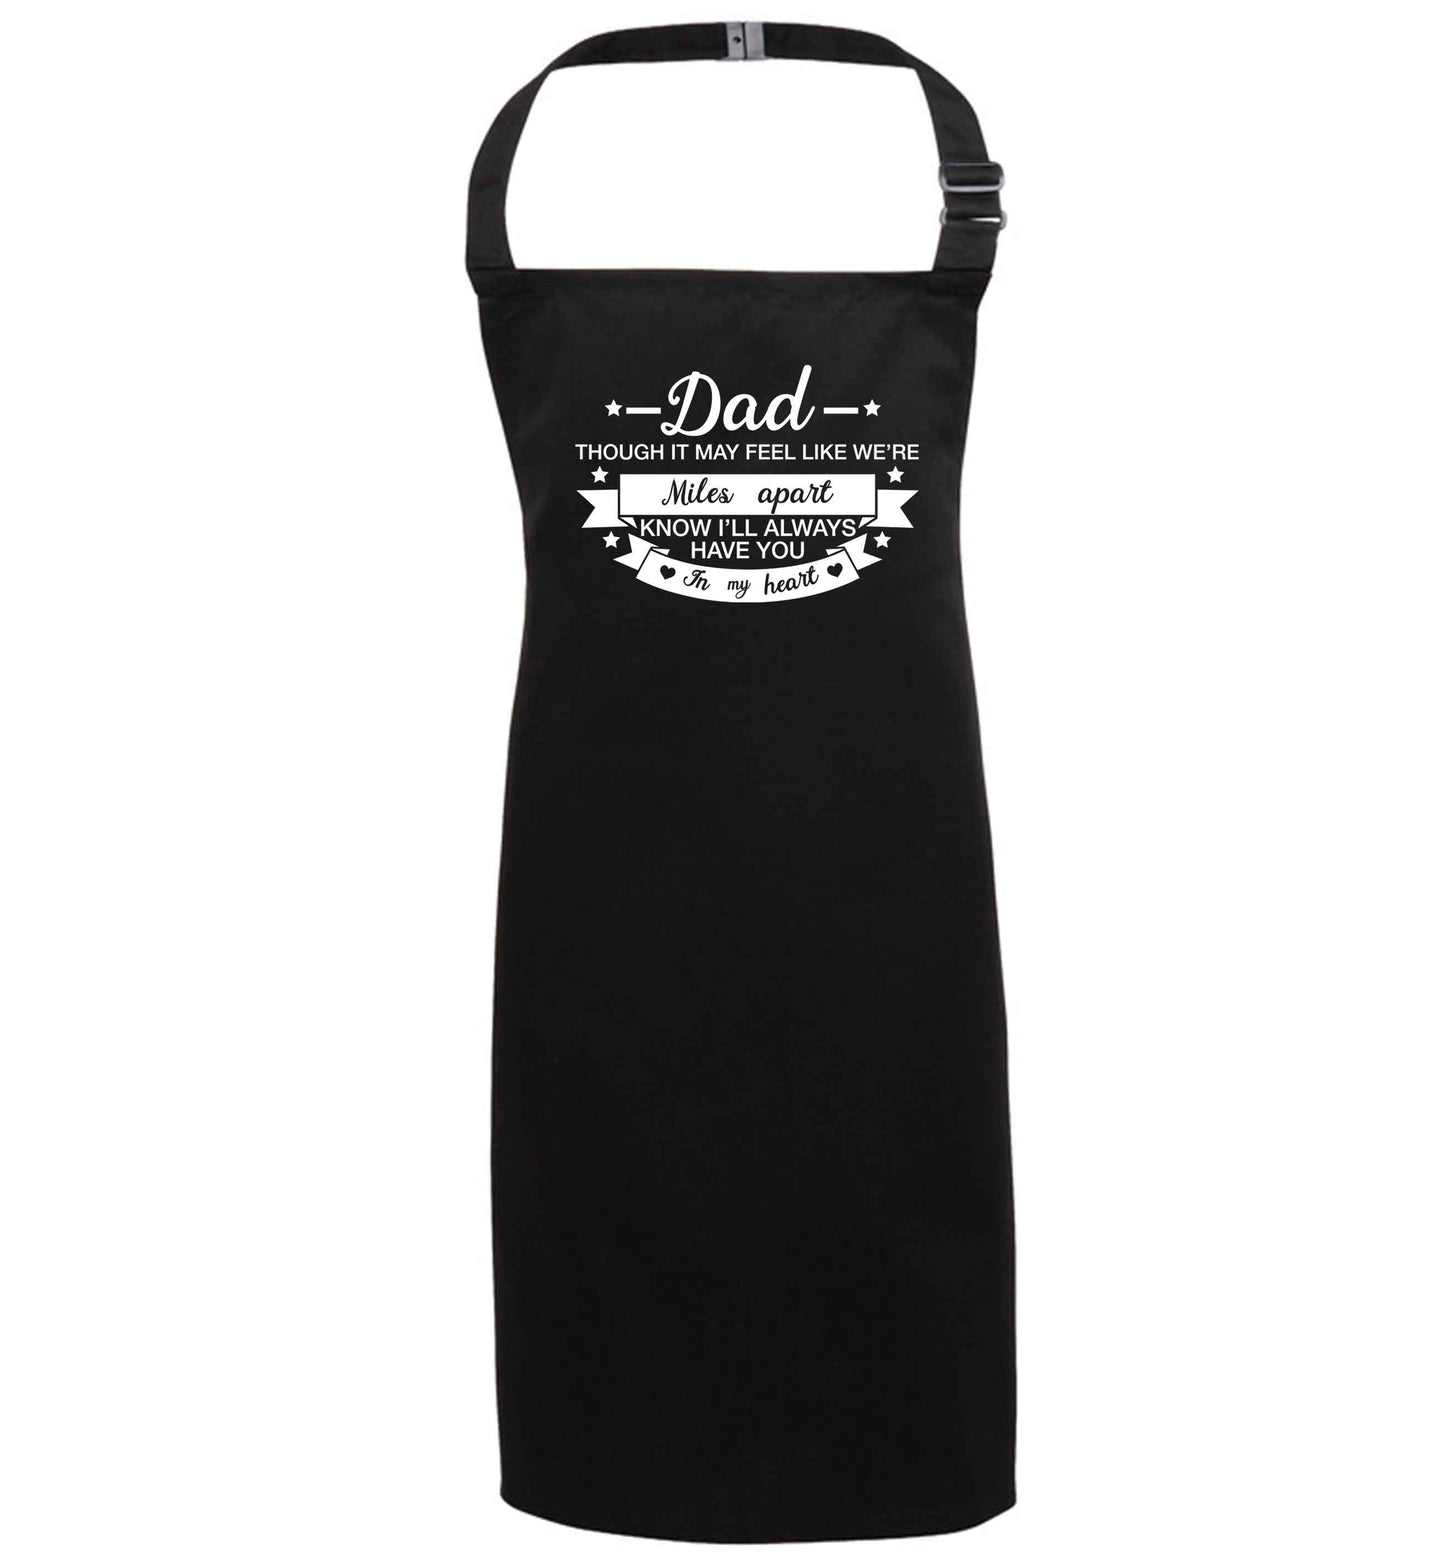 Dad though it may feel like we're miles apart know I'll always have you in my heart black apron 7-10 years